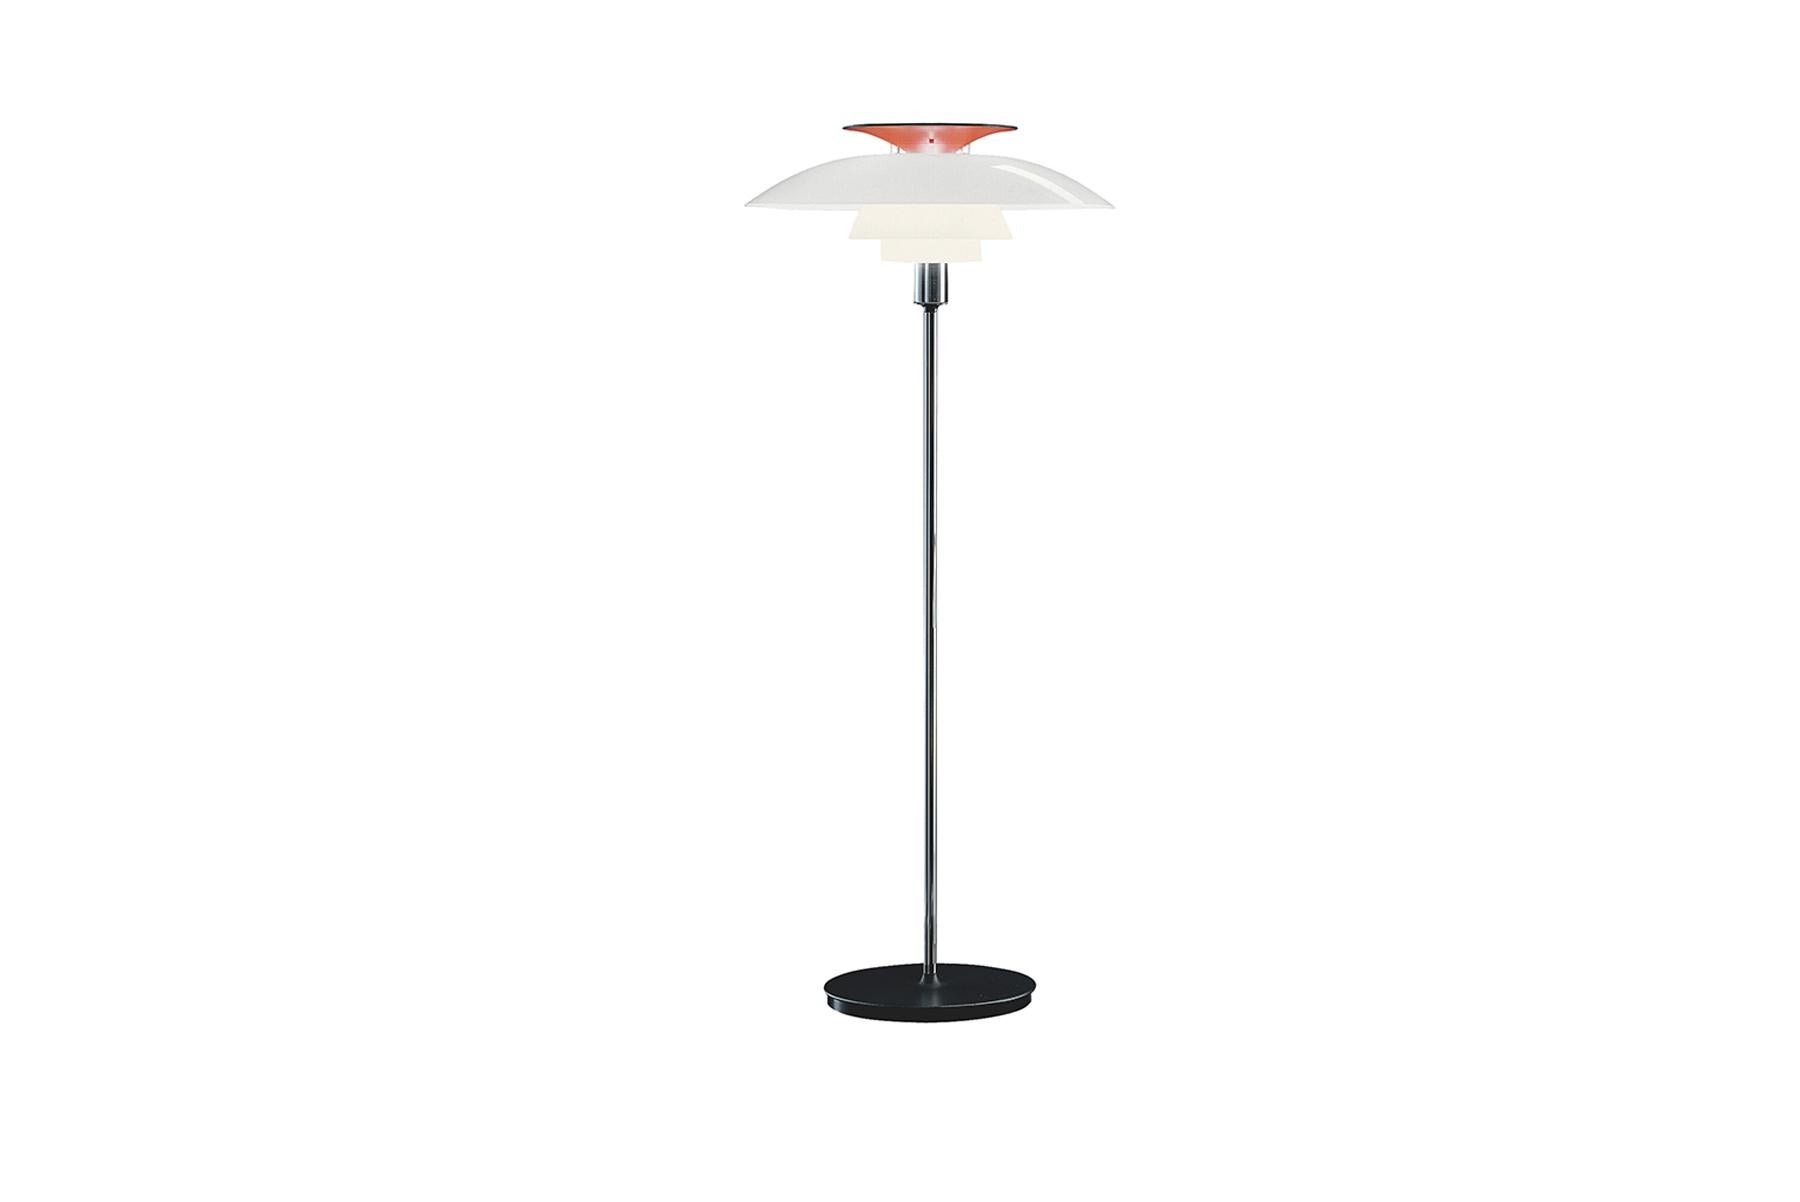 The fixture emits diffuse and symmetrical light. The majority of the light is directed downwards, and the opal acrylic shades provide comfortable room lighting. The red hue of the top reflector helps give the light a warmer glow. Poul Henningsen